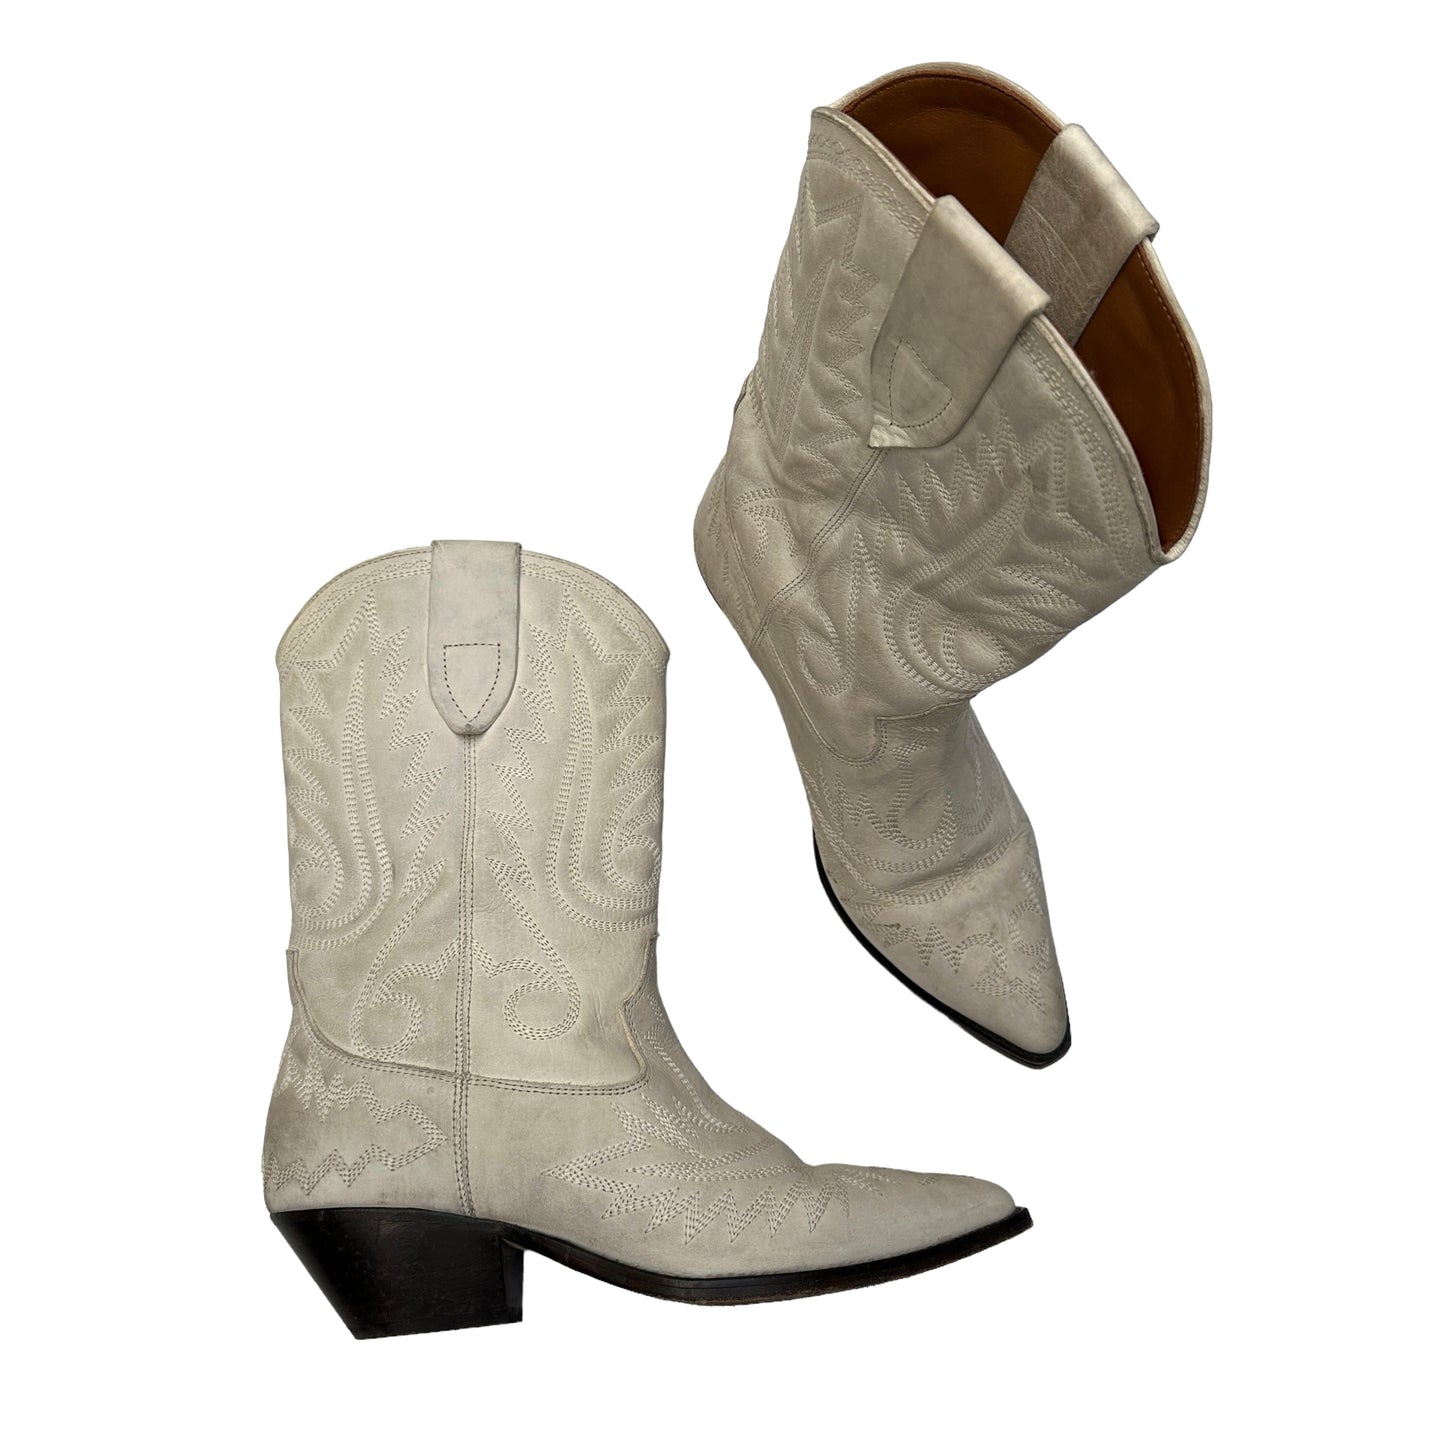 Cream Leather Cowgirl Boots - 10